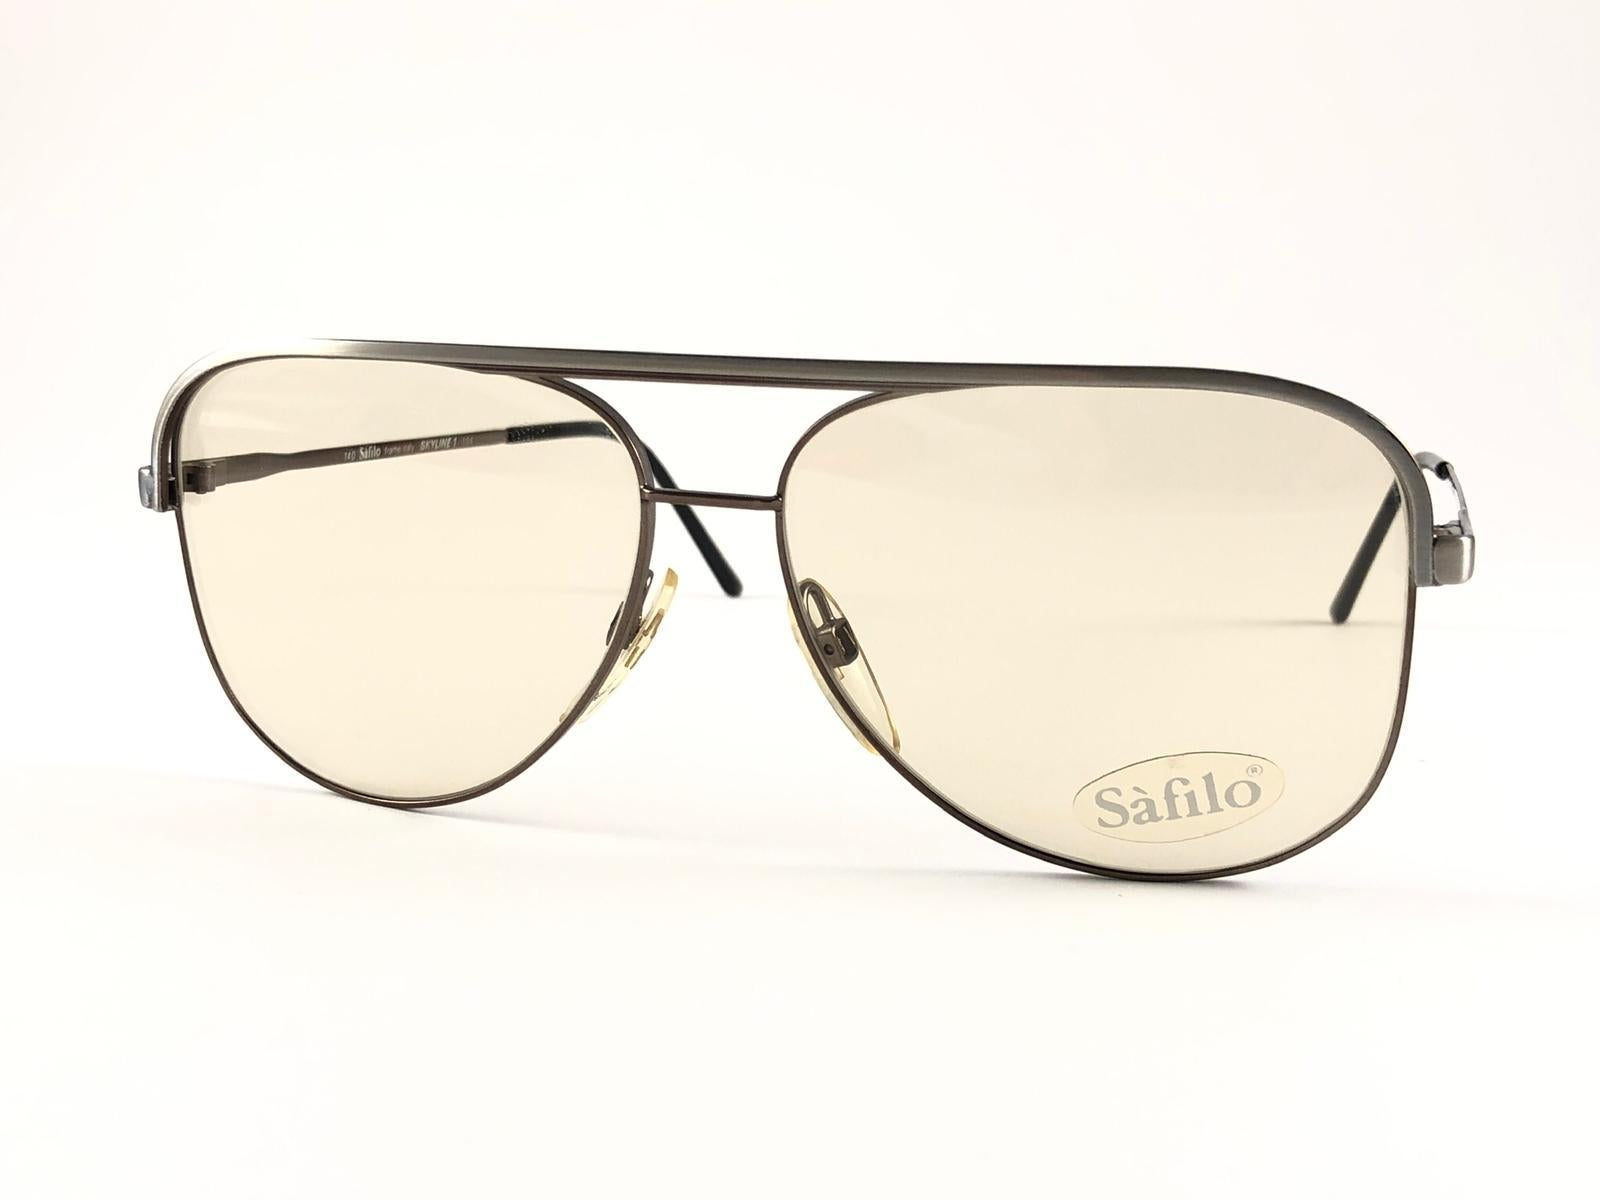 New Vintage Safilo Skyline 1 104 Copper Frame 1980's Sunglasses Made in Italy In New Condition For Sale In Baleares, Baleares